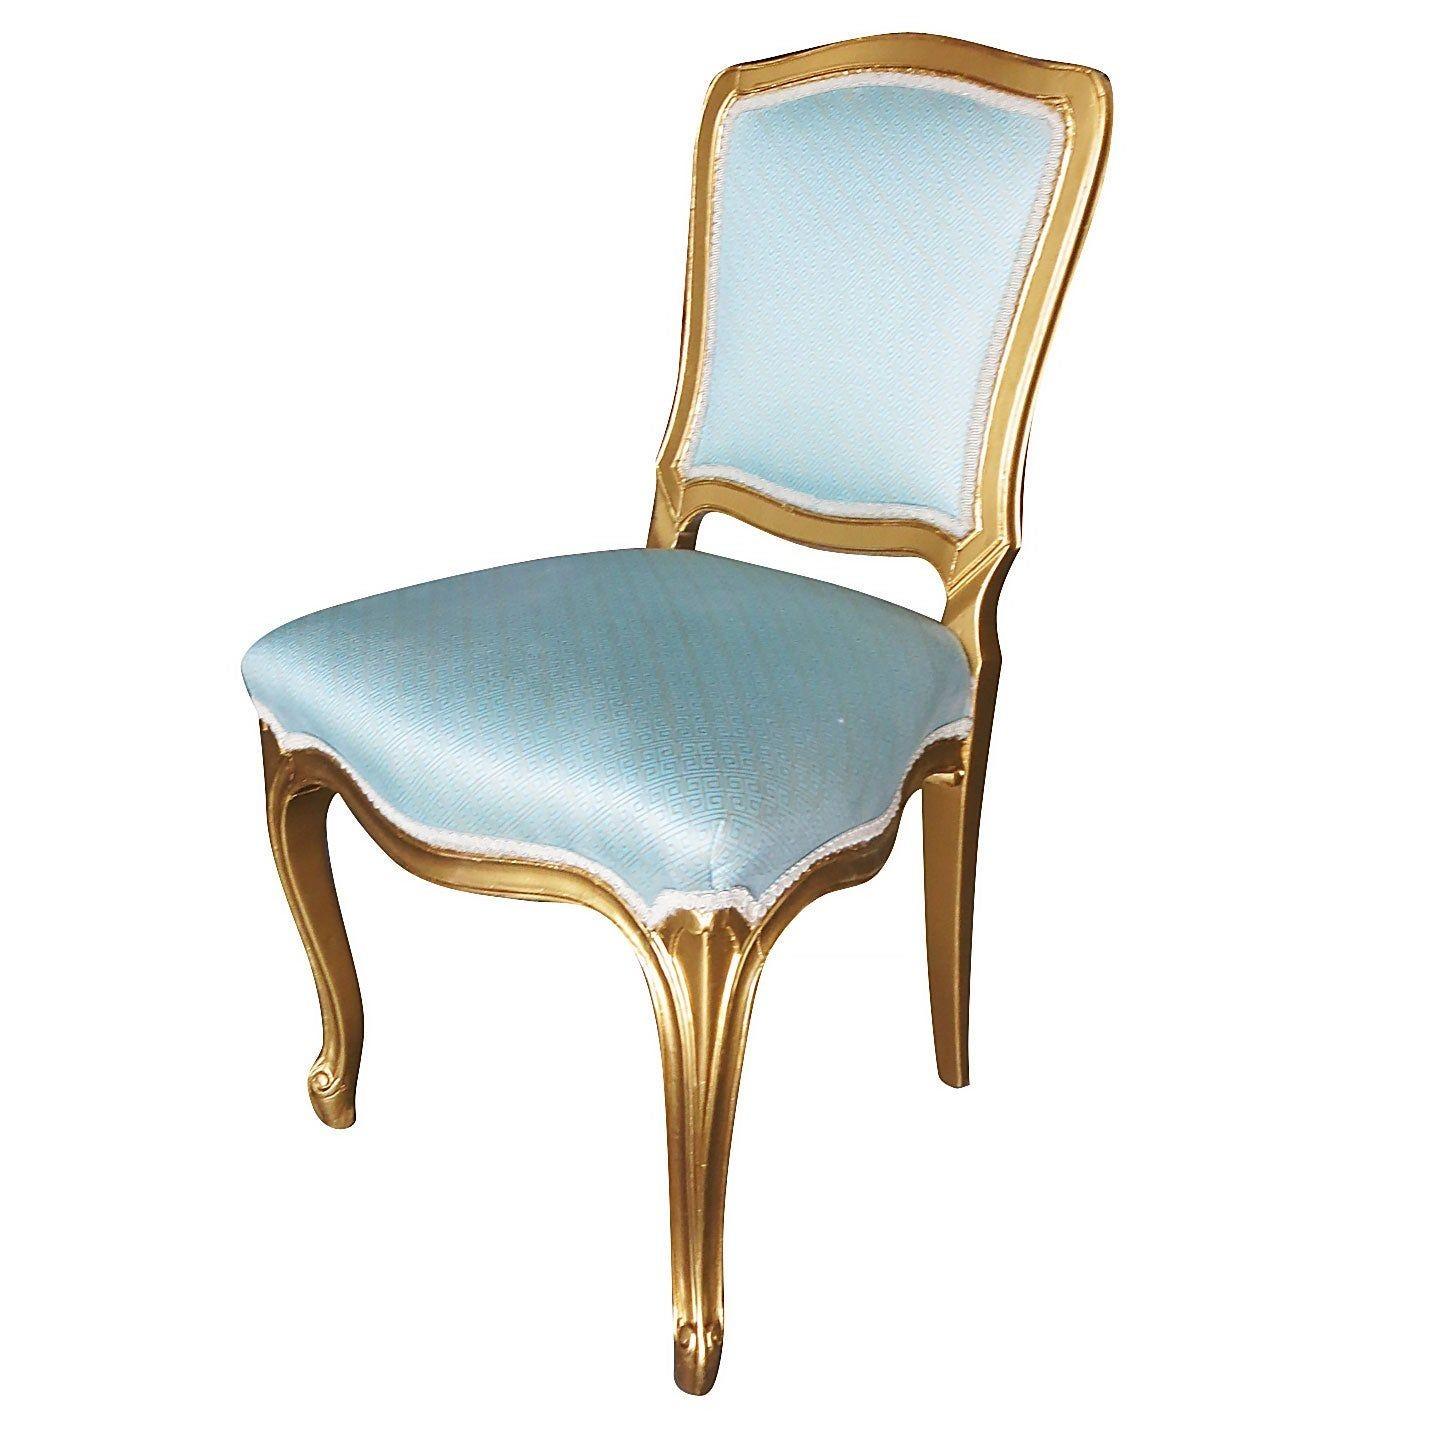 This set of 24 dining room side chairs were manufactured in the 1950s in a Louis XVI-style Hollywood Regency design and finished in gold leaf color, featuring blue and gold colored fabric covers. Side Chairs

Extra chairs are available, please